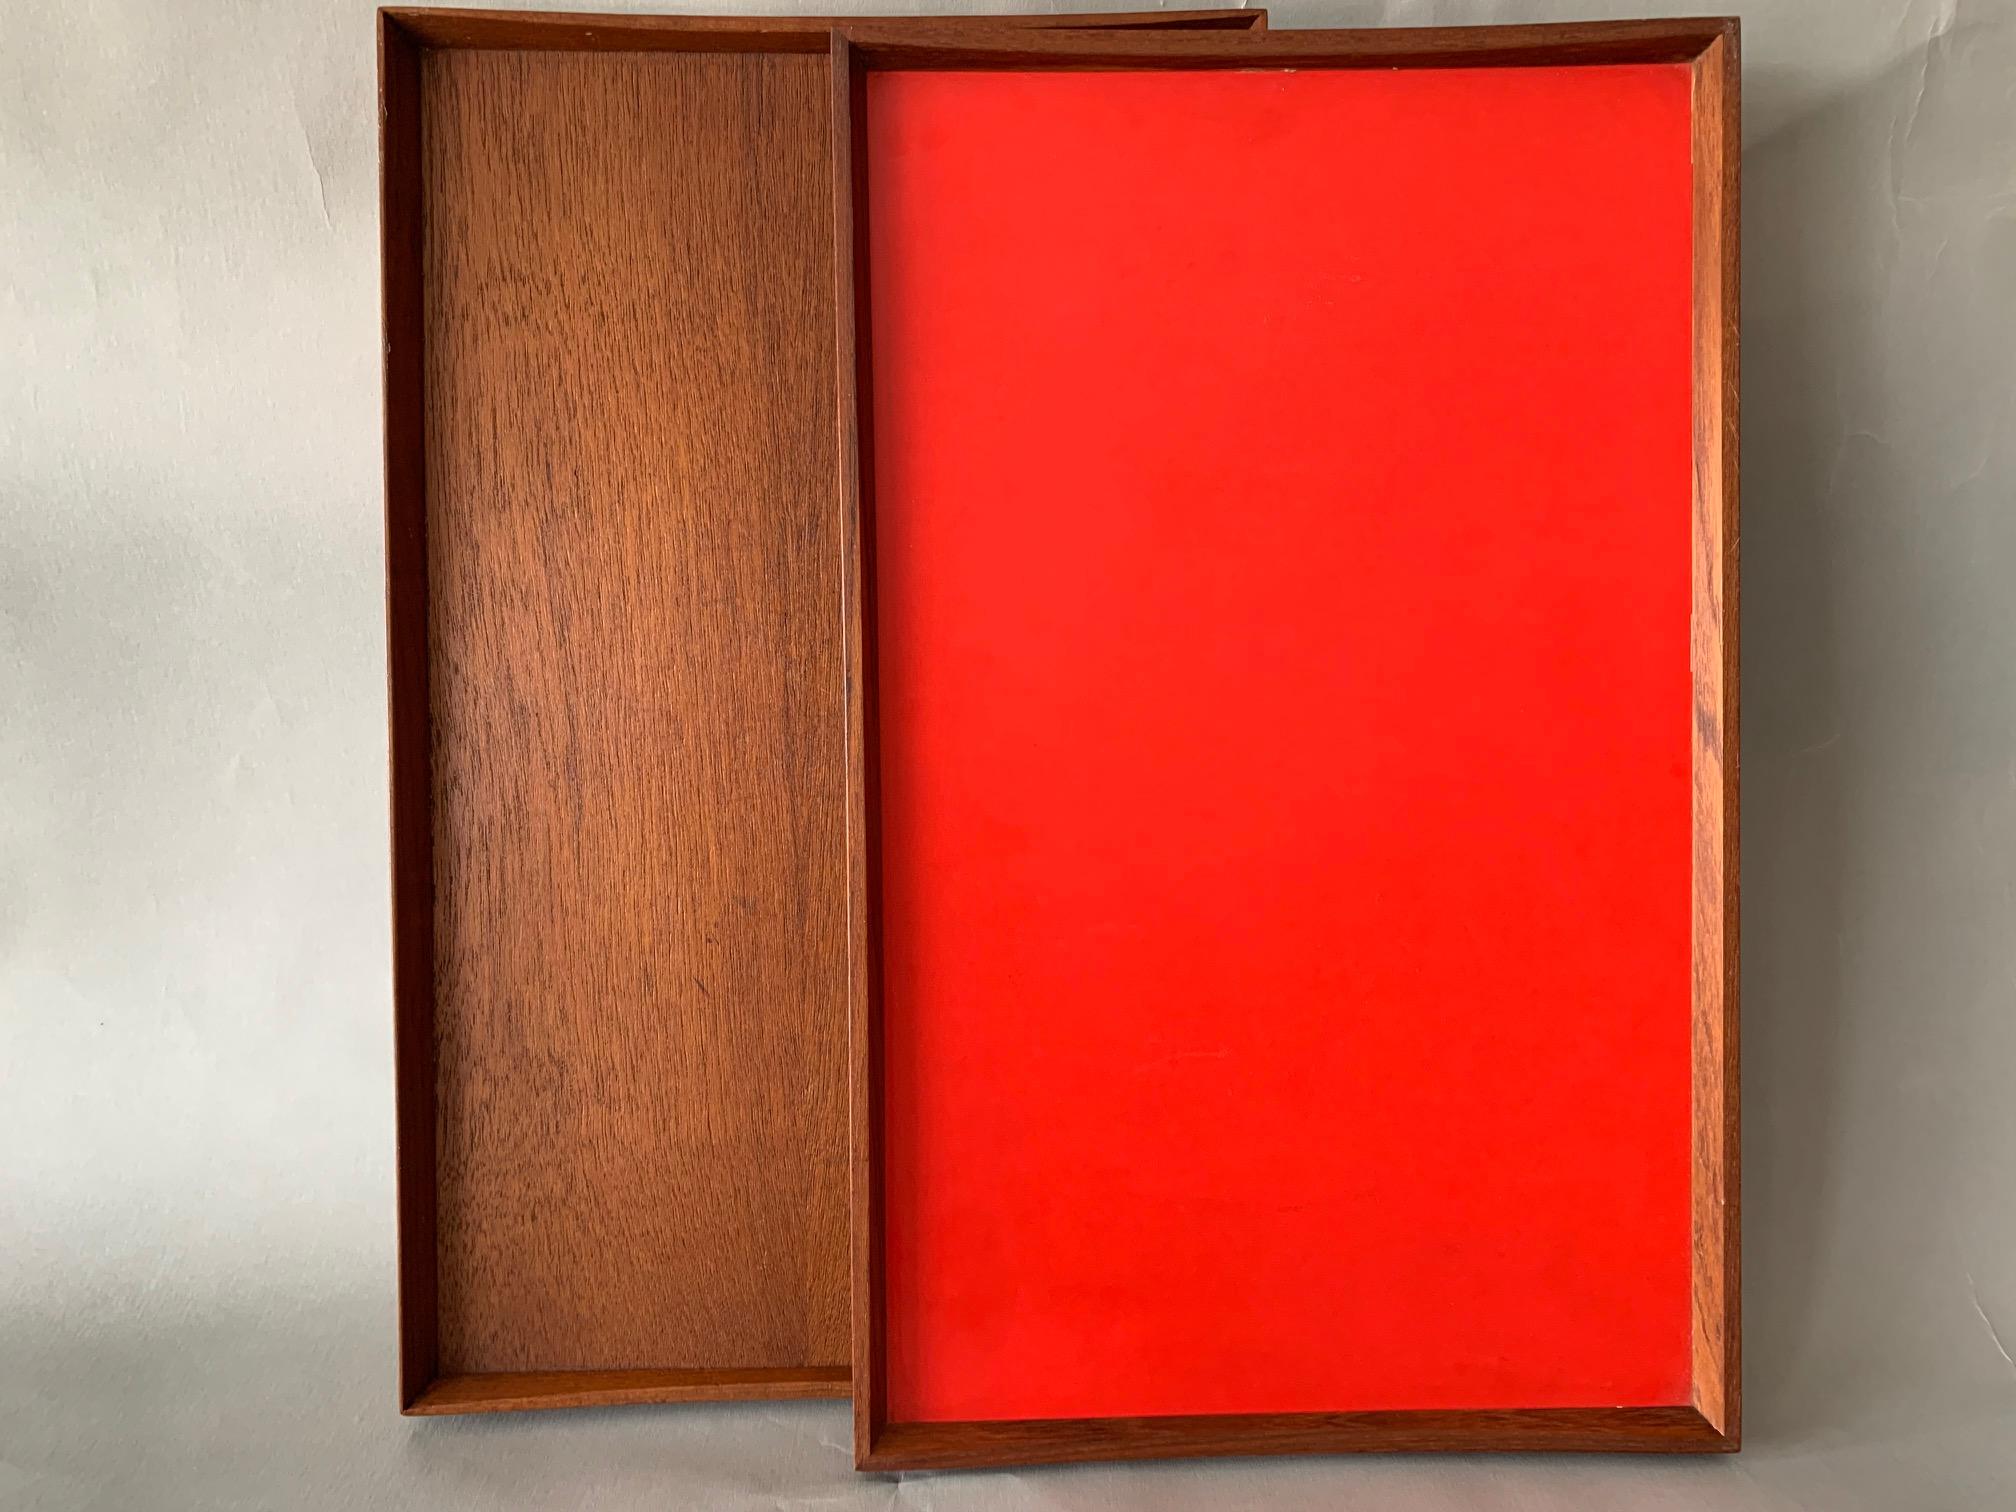 Two trays-one reversible red/black the other all teak designed by Finn Juhl for Torben Orskov, circa late 1950s. Not that they are slightly different sizes, one is marked 